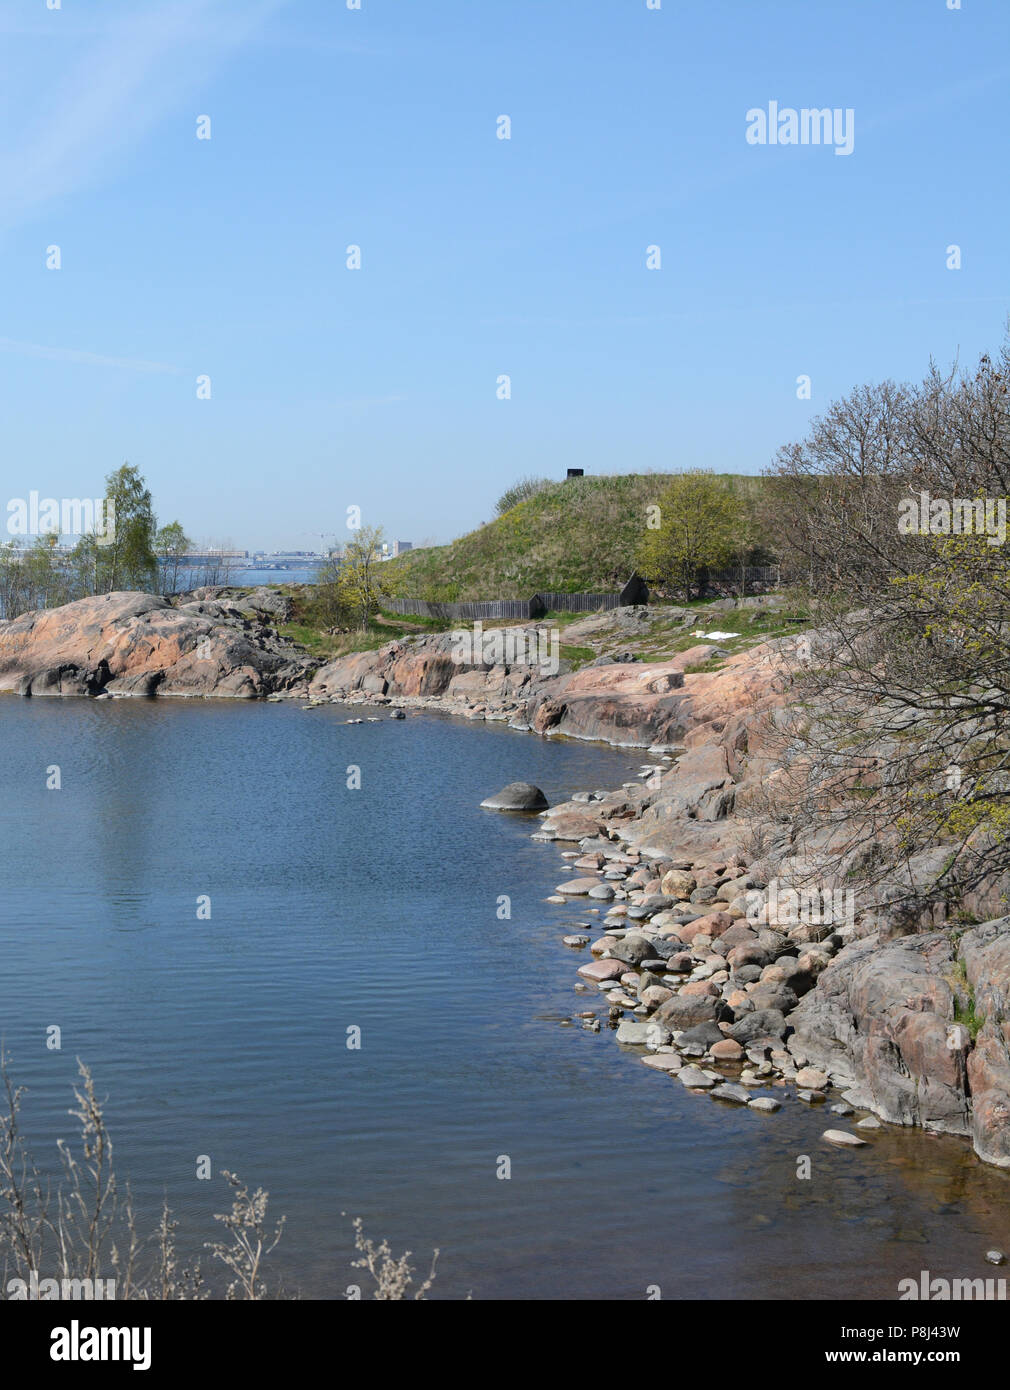 Suomenlinna beach and rocky cove on a sunny day in Finland. Trees and shrubs coming into leaf in spring. Stock Photo